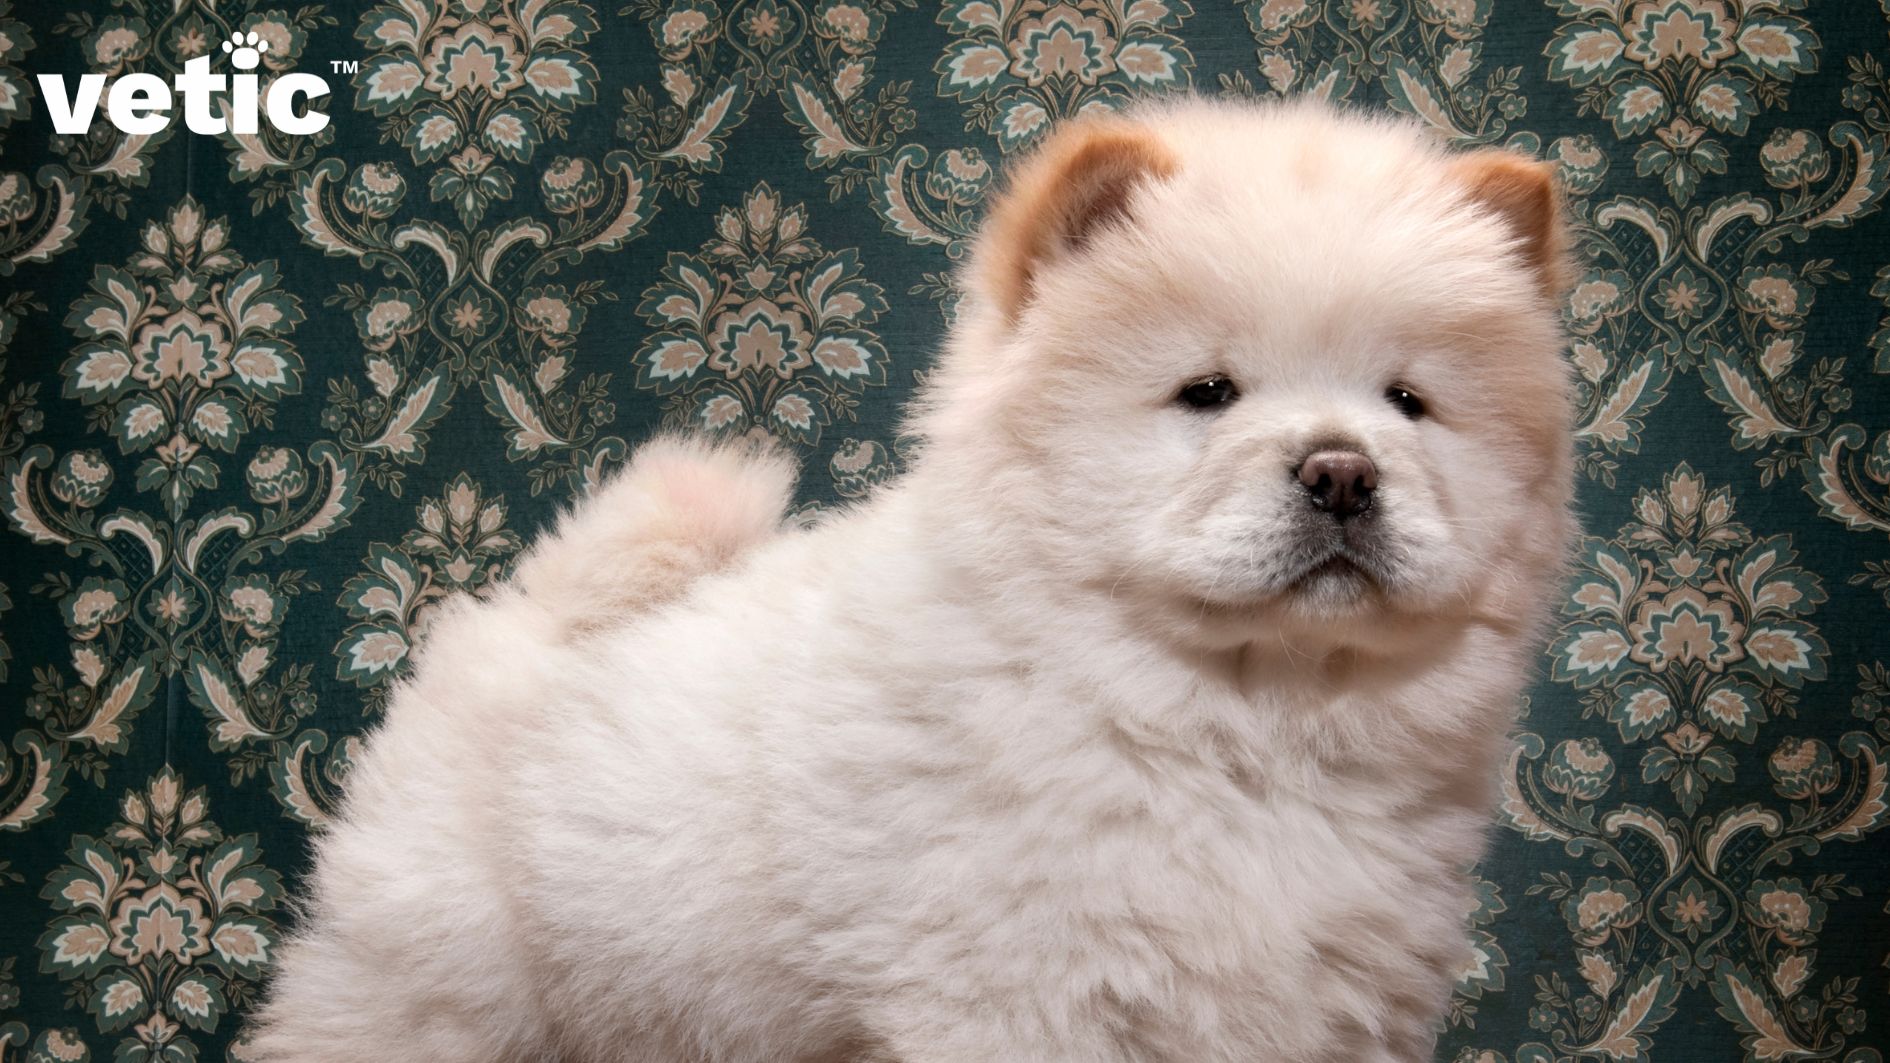 A white to fawn colored Chow Chow puppy standing in front of a teal and pastel pink colourered, floral patterned wall.